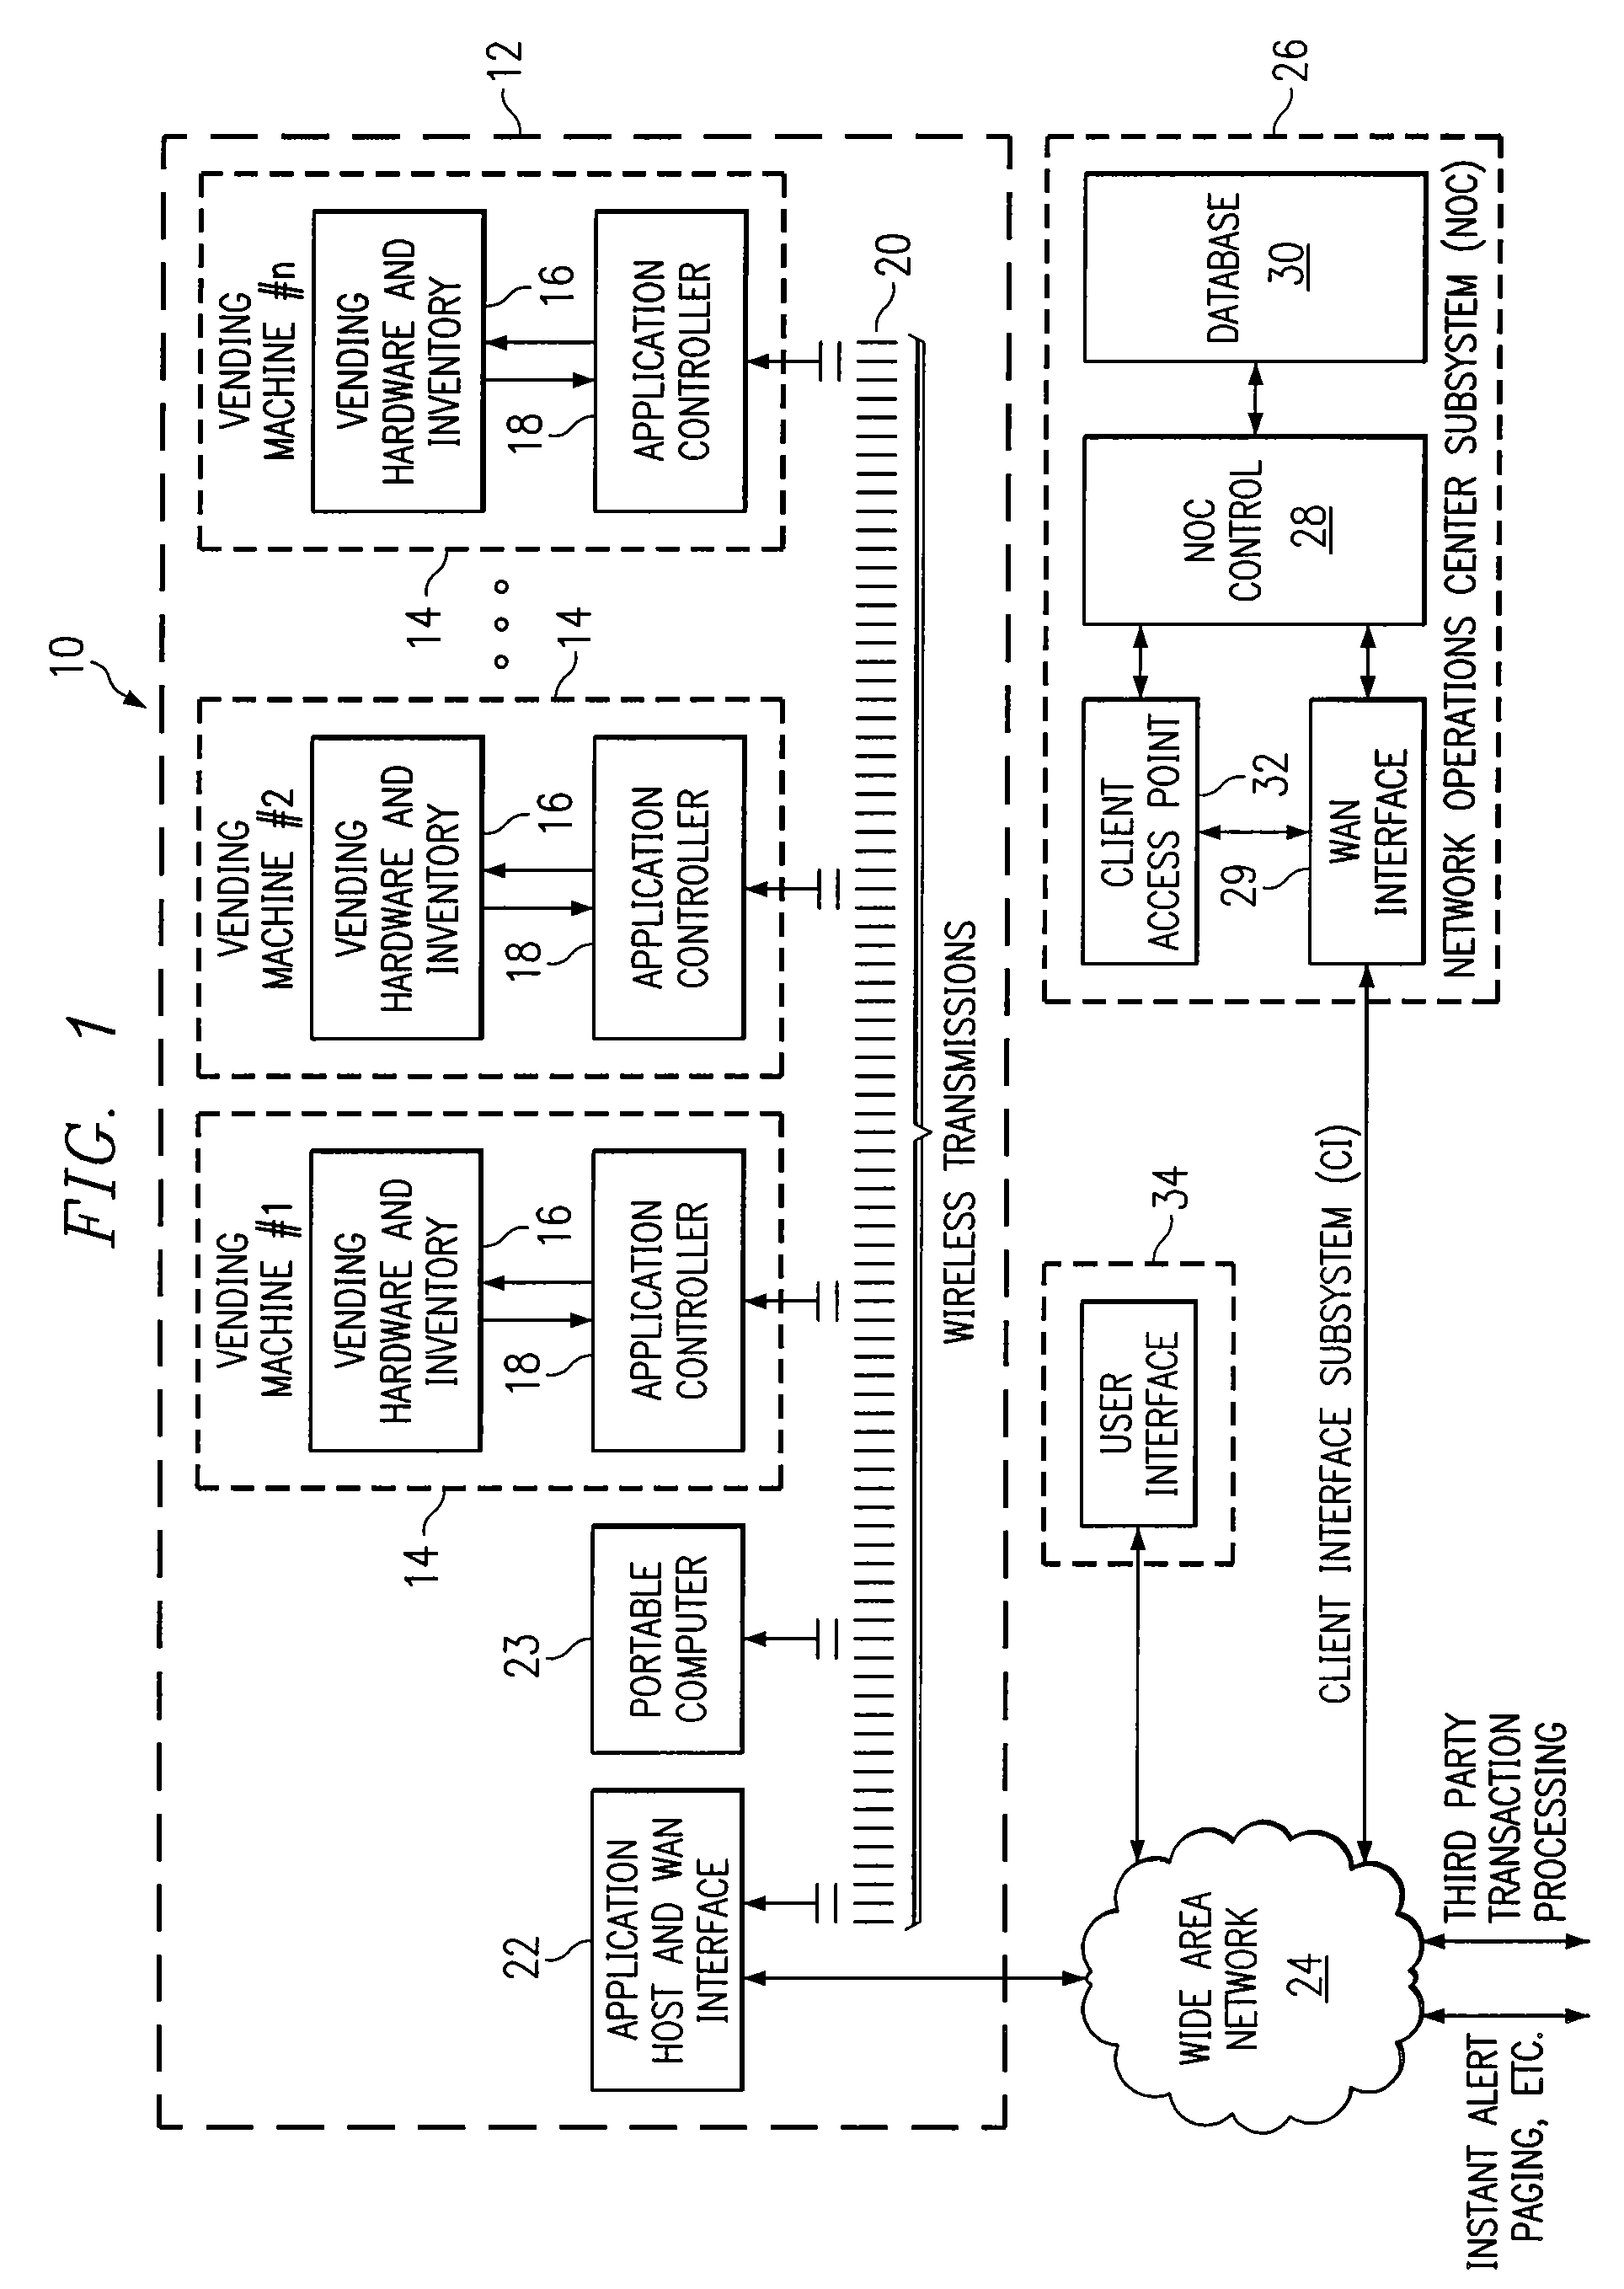 Method and System for Interfacing a Machine Controller and a Wireless Network